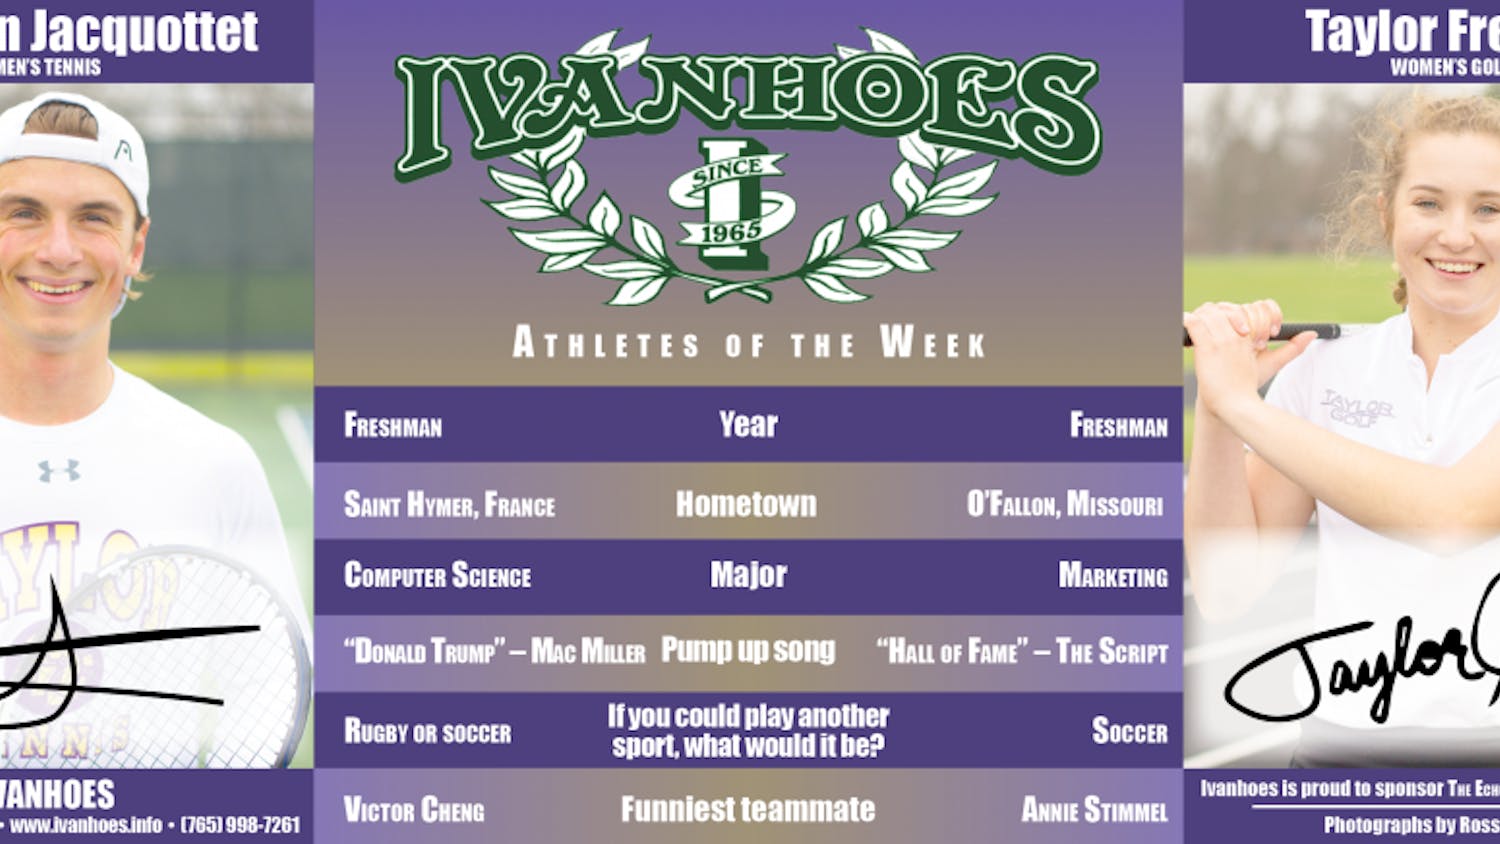 AOTW-–-Christen-Jacquottet-and-Taylor-French.png